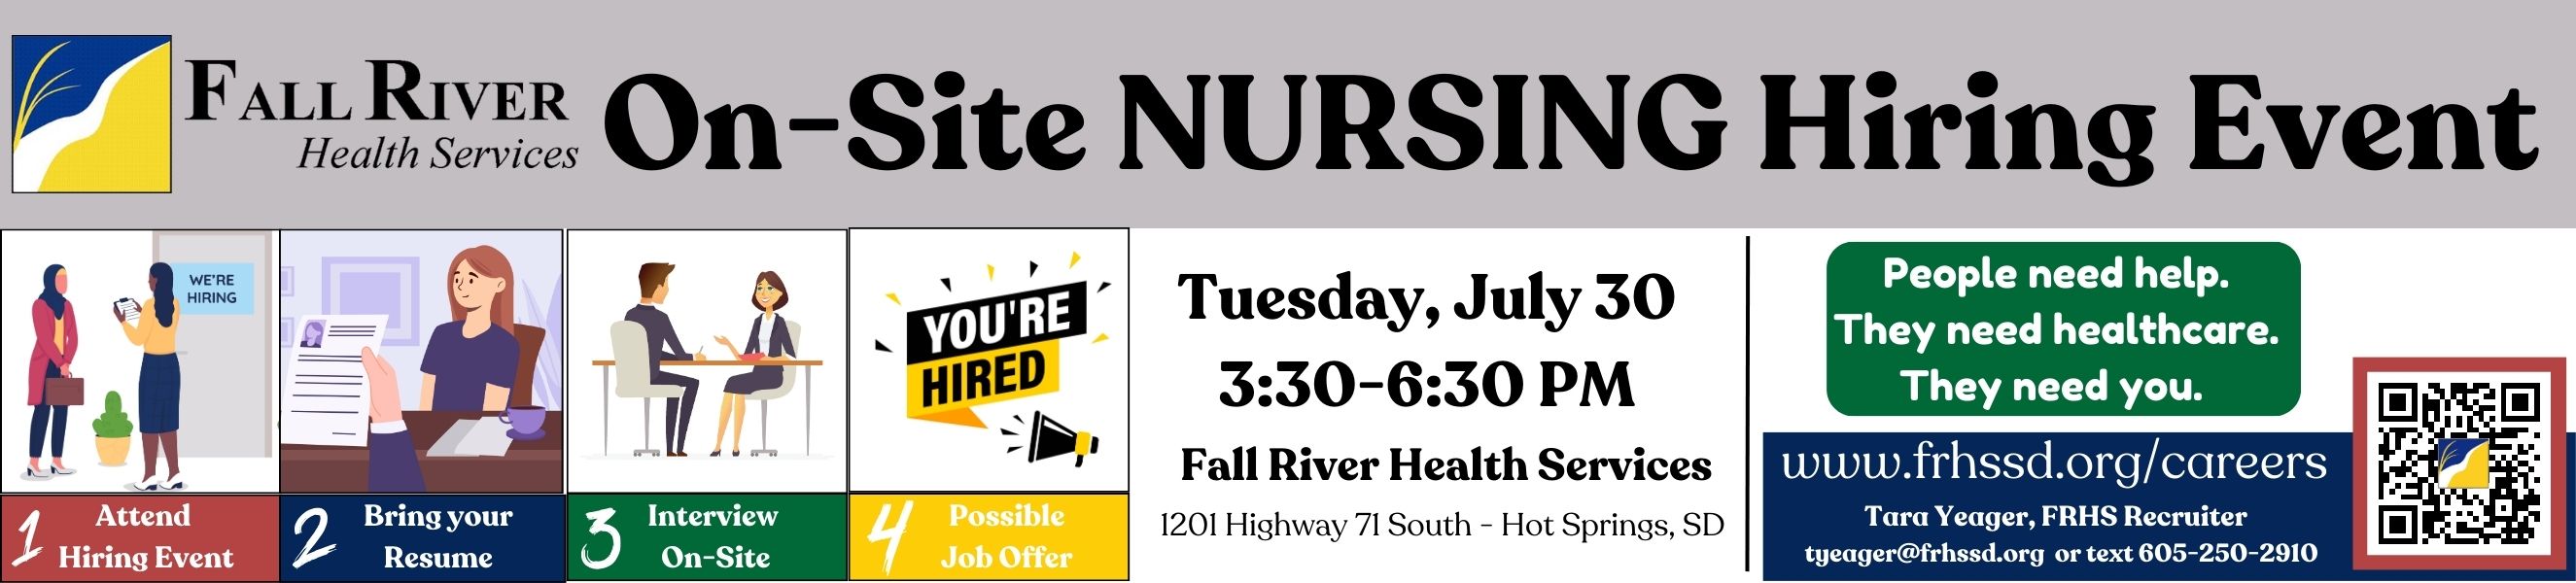 Nurse Hiring Event Tuesday, July 30 3:30-6:30 Fall River Health Services. www.frhssd.org/careers Tara Yeager, FRHS Recruiter